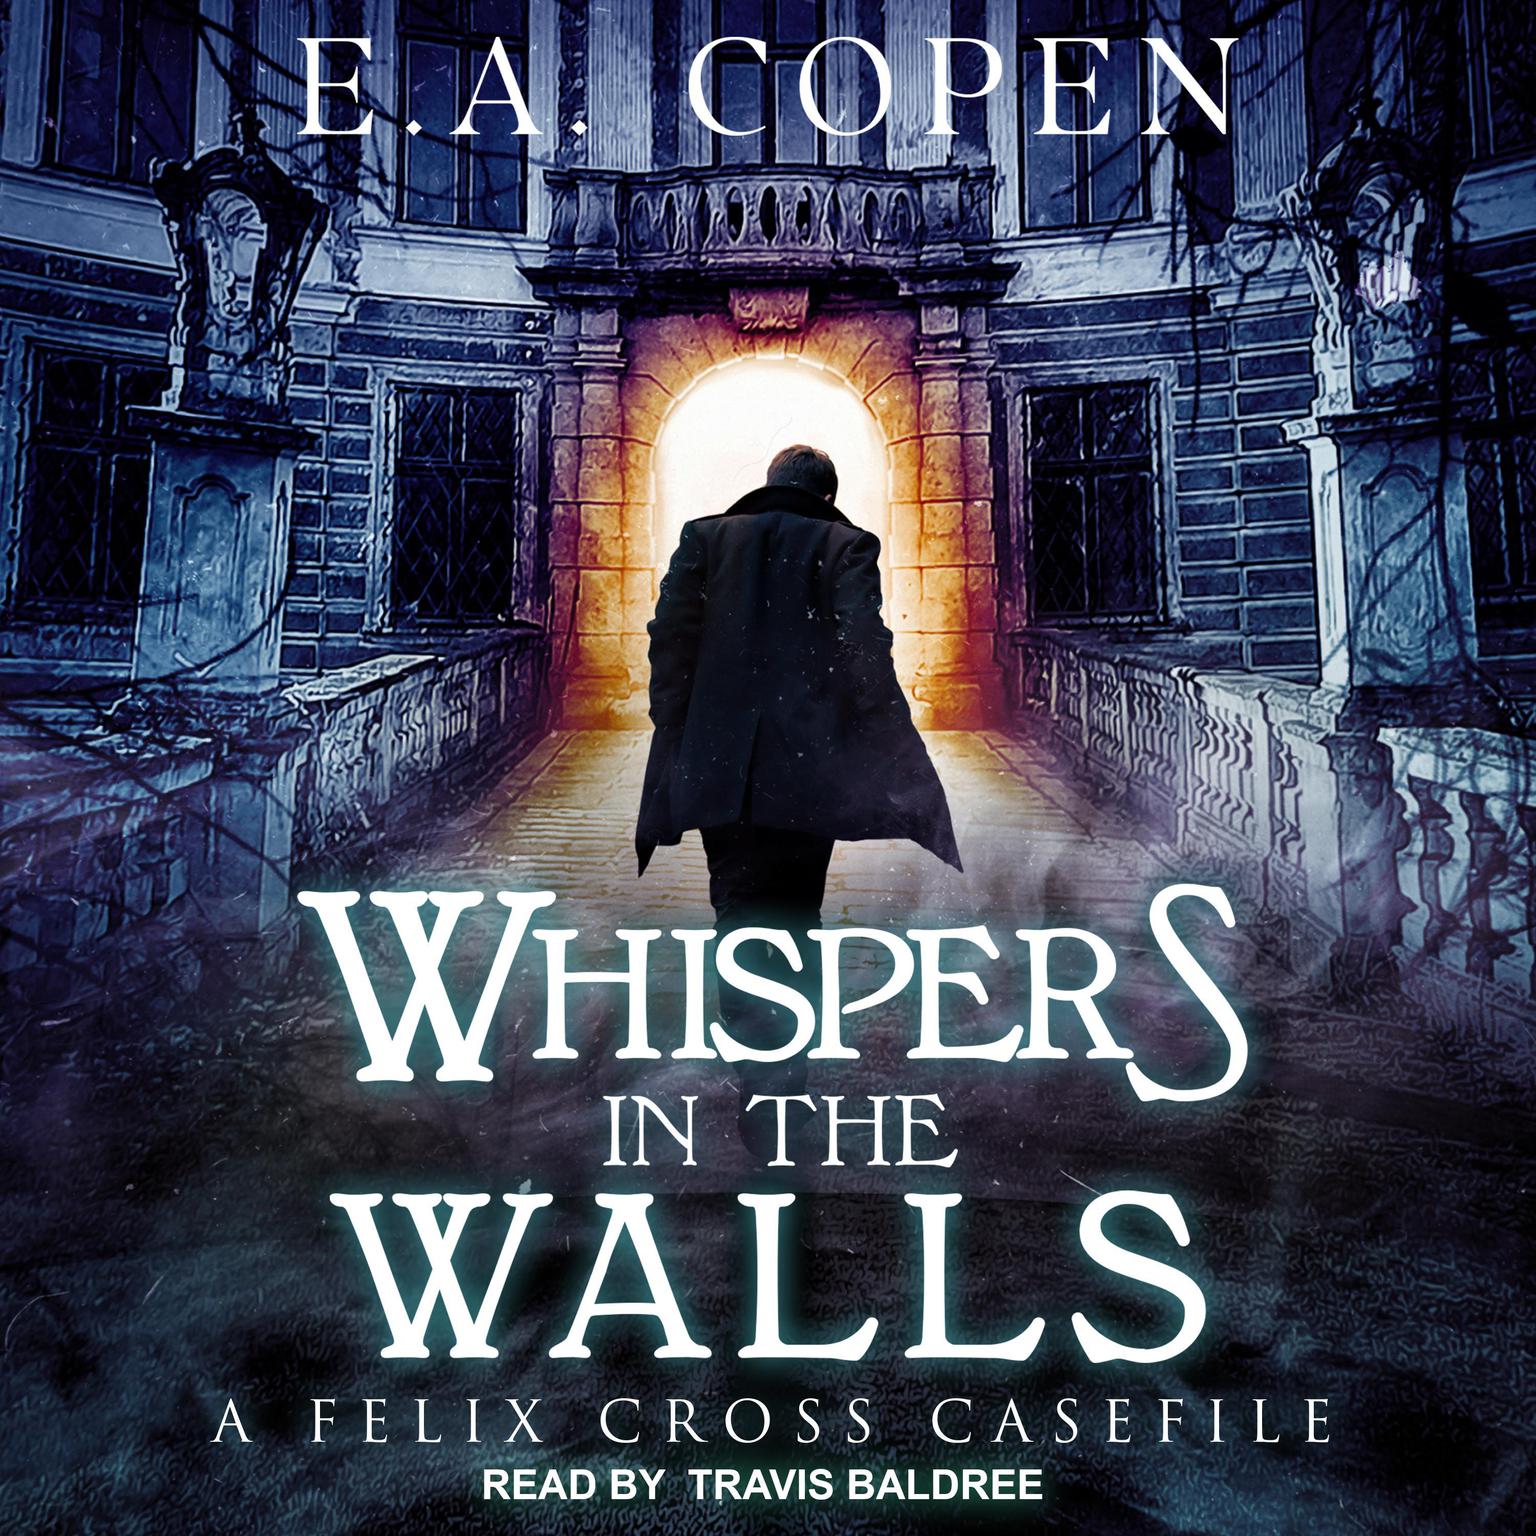 Whispers in the Walls: A Felix Cross Casefile Audiobook, by E.A. Copen